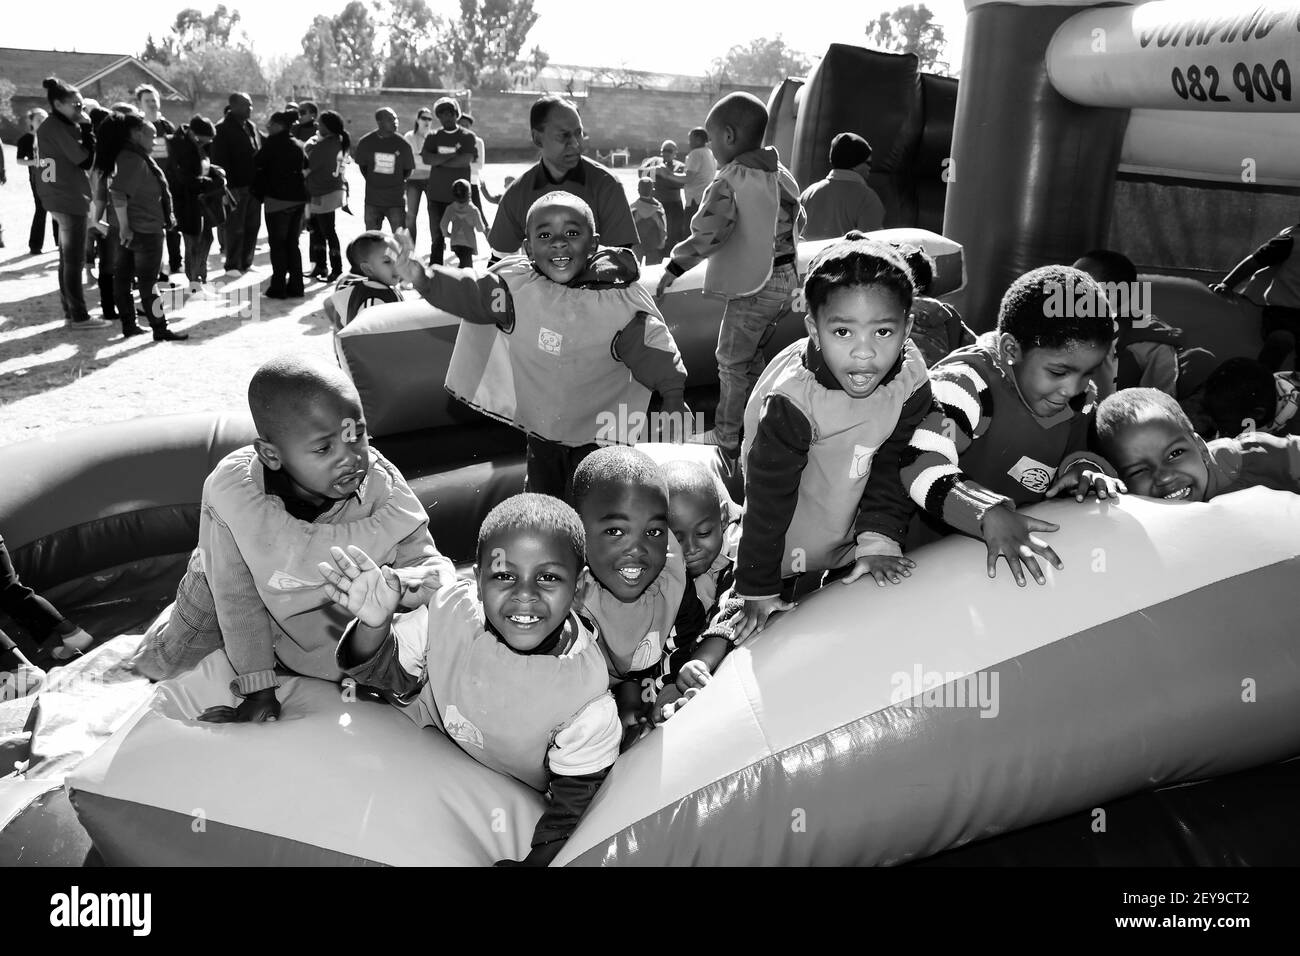 JOHANNESBURG, SOUTH AFRICA - Jan 05, 2021: Soweto, South Africa - July 18, 2012: Young African Preschool children having fun on a jumping castle on th Stock Photo